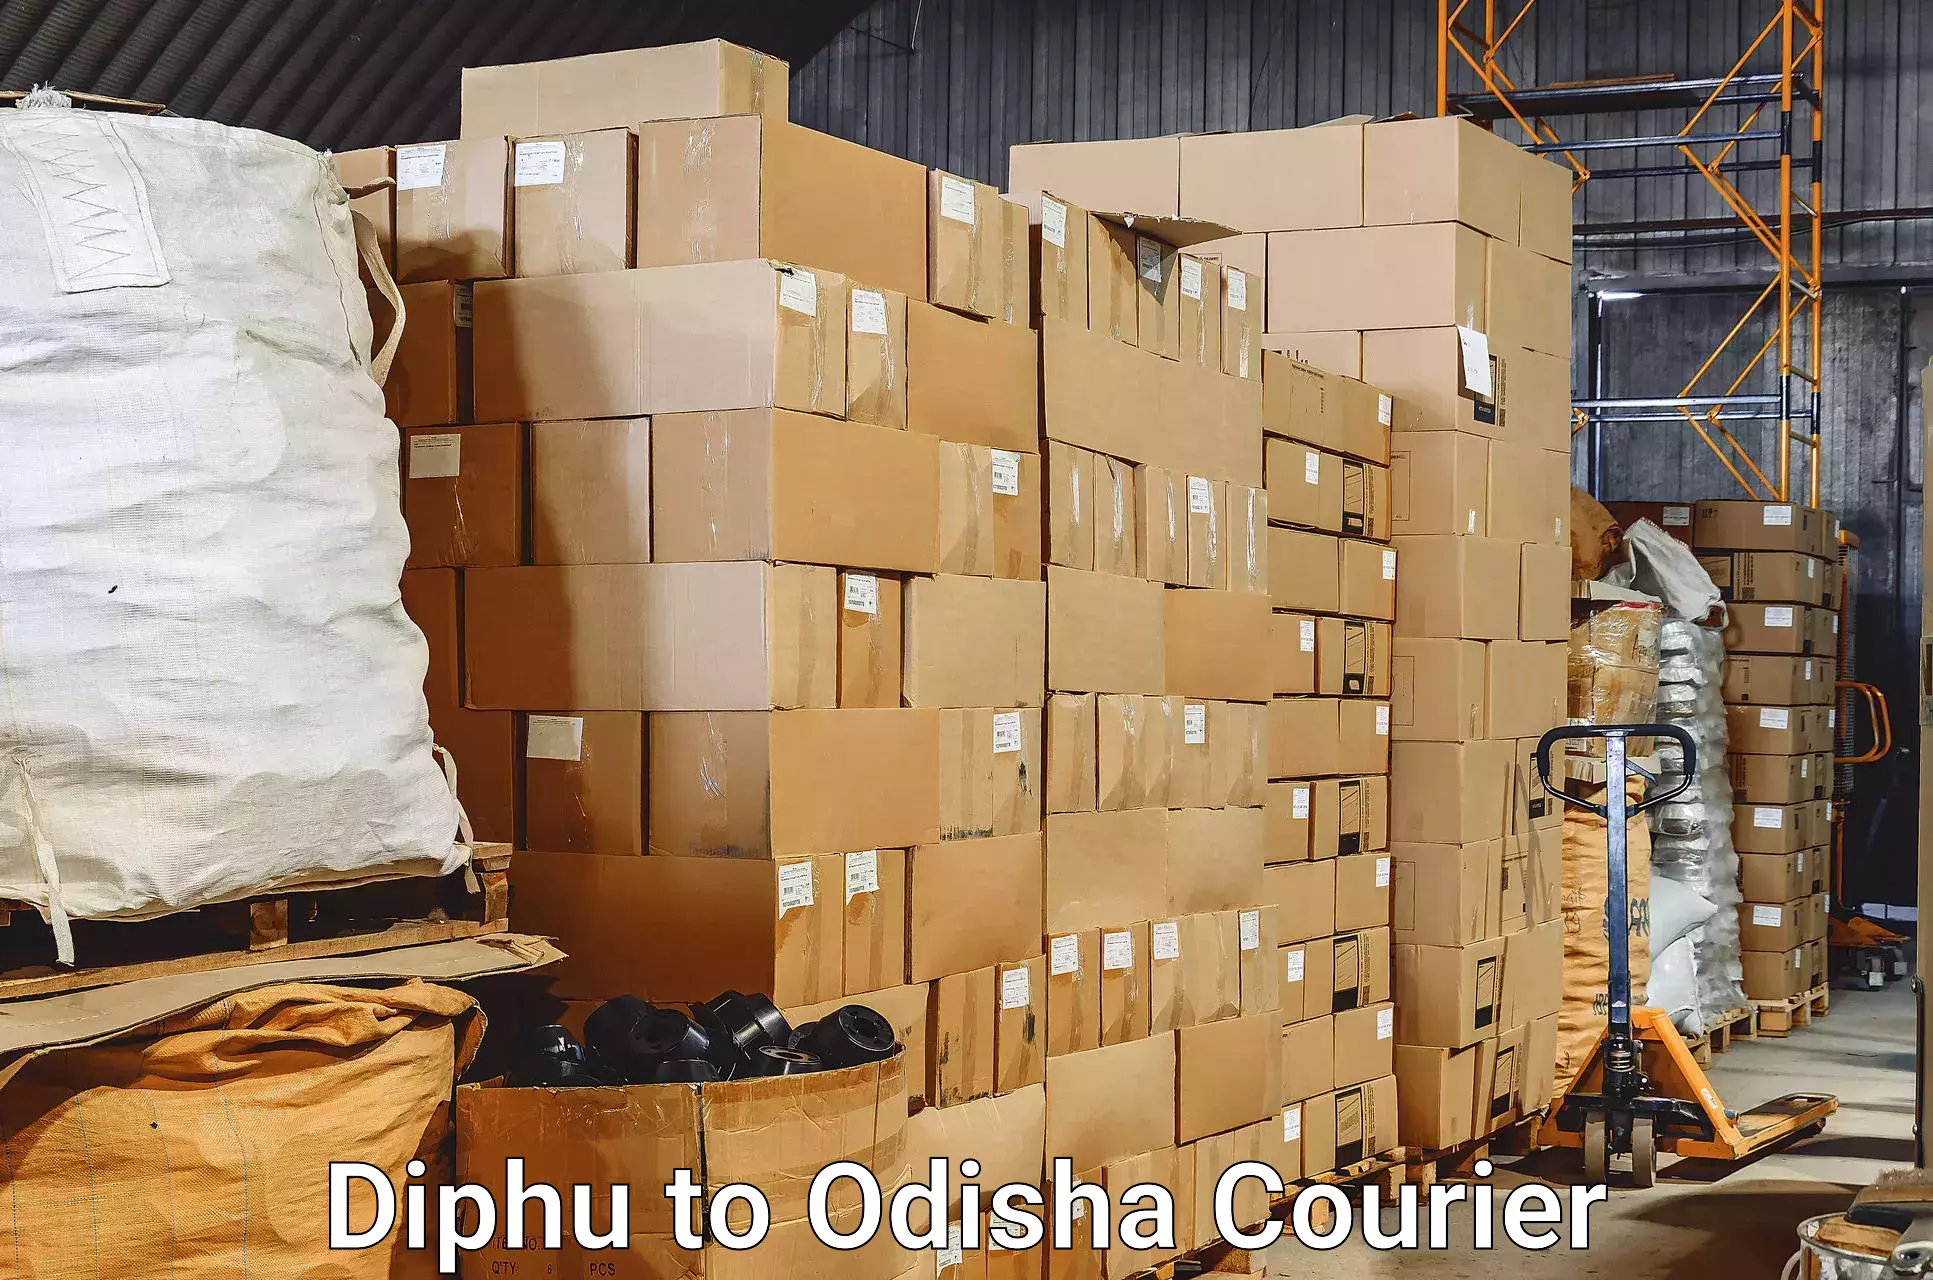 Express luggage delivery in Diphu to Kendujhar